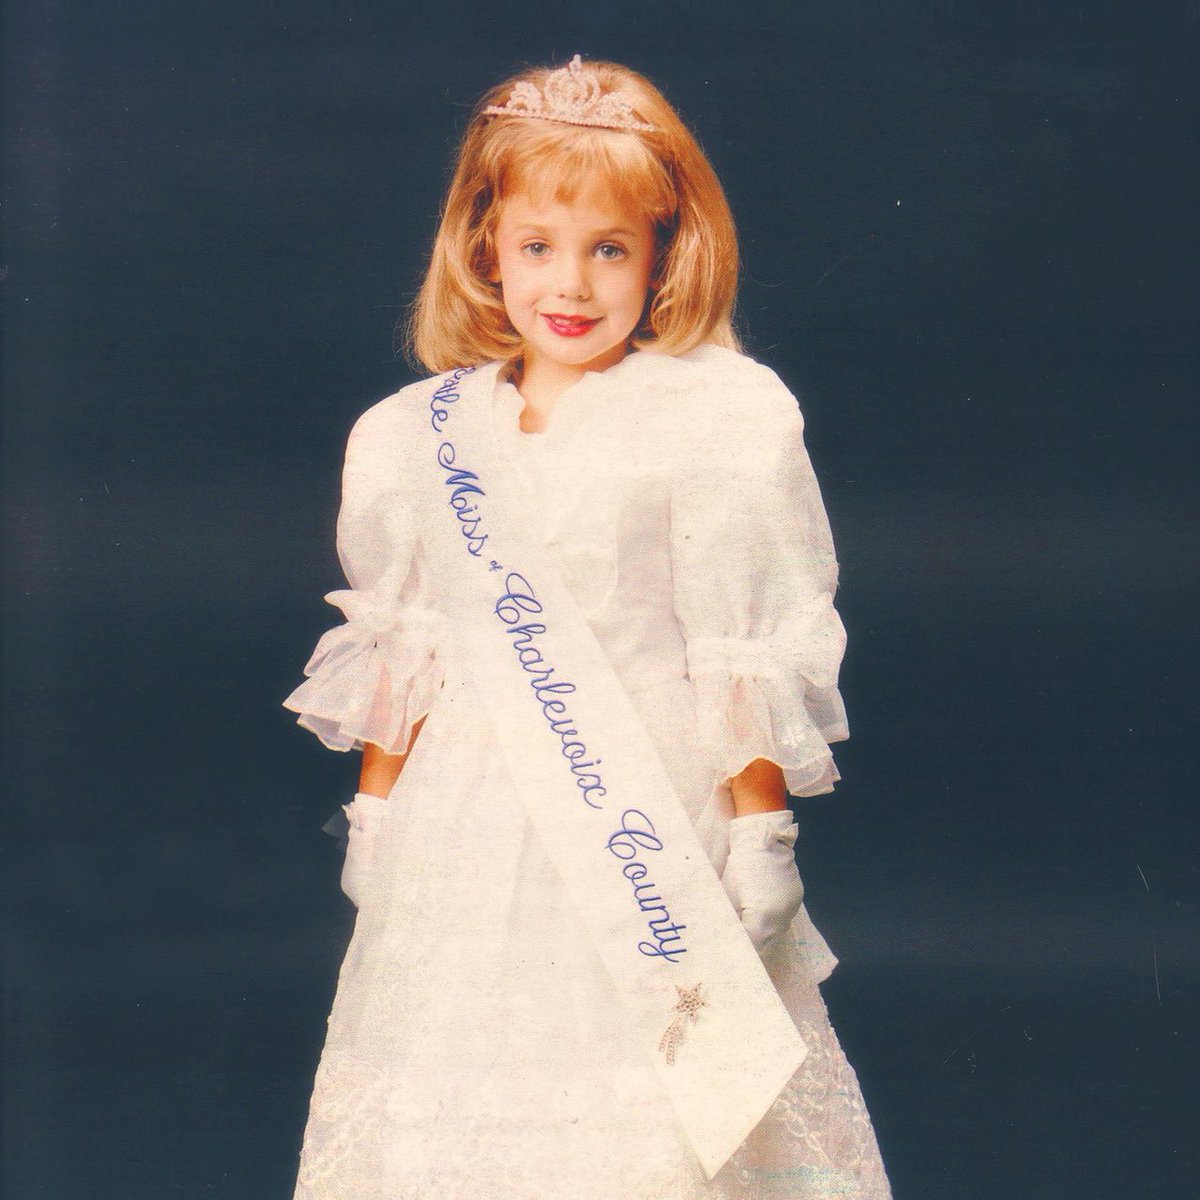 And last but certainly not least, JonBenét’s first-ever Pageant title.Crowned in the Summer of 95 in the rural, lakeside community of Charlevoix MI. A tiny bejeweled tiara sits askew atop JonBenét’s mop of blond hair.She’d be the first, last and *only* Little Miss Charlevoix.